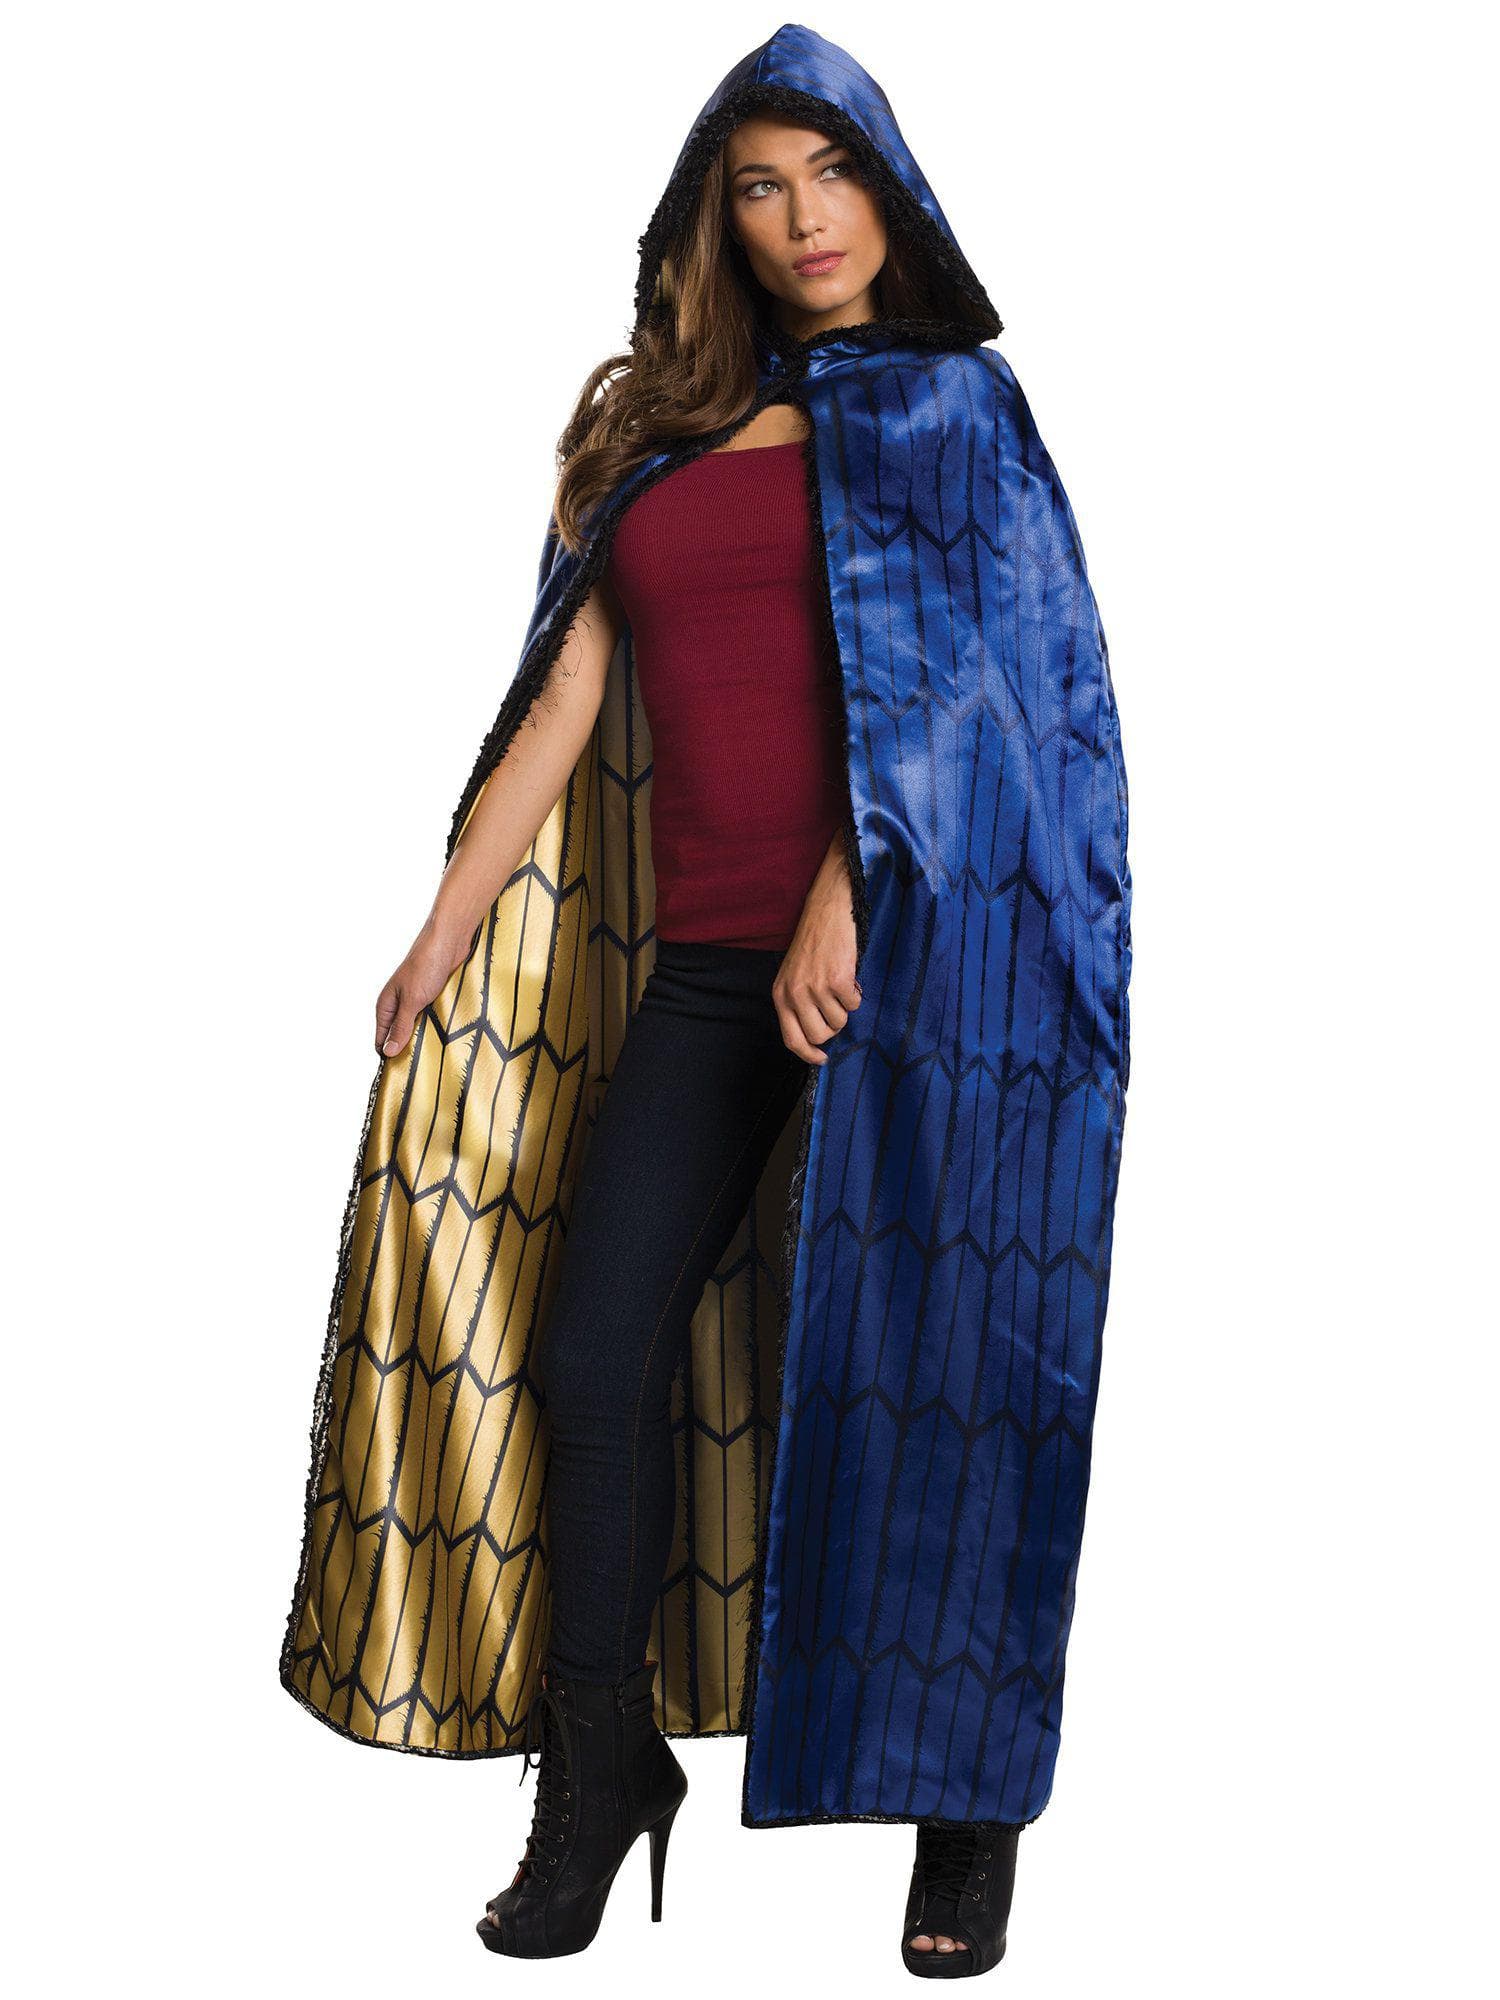 Adult Justice League Wonder Woman Deluxe Costume - costumes.com